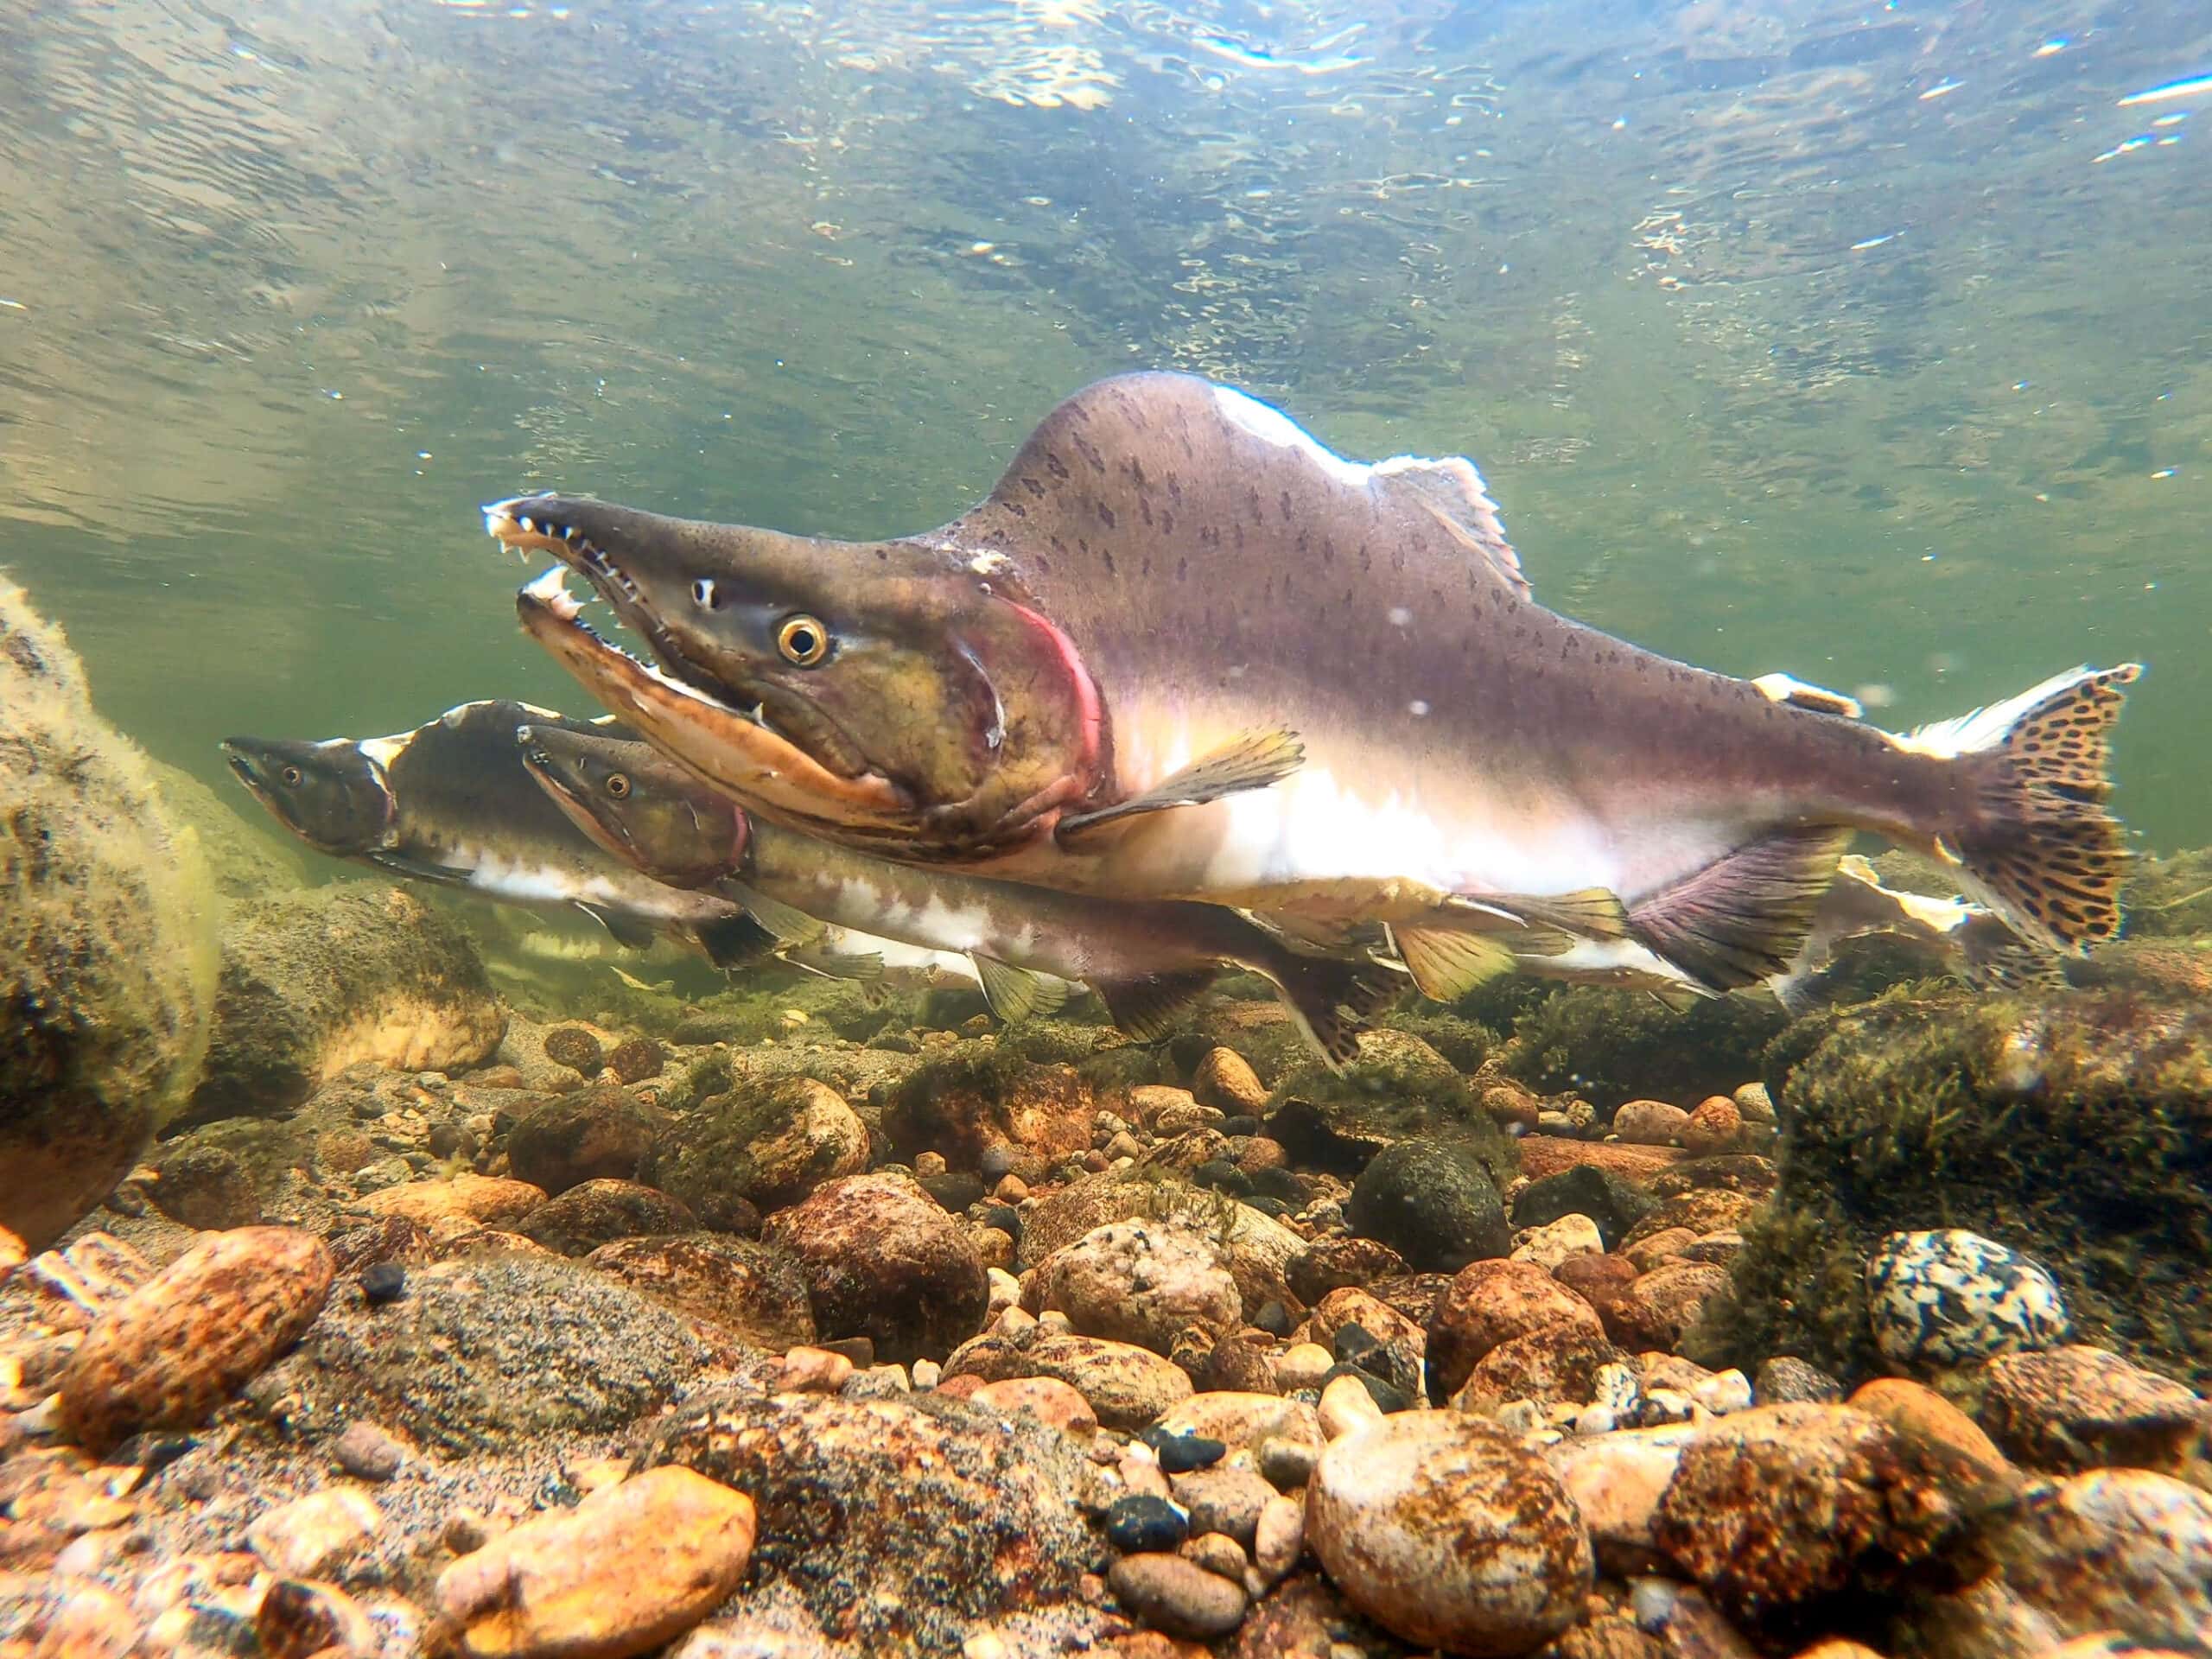 The males develop a hooked chin and a hump on their back during spawning season. Photo: Panu Orell